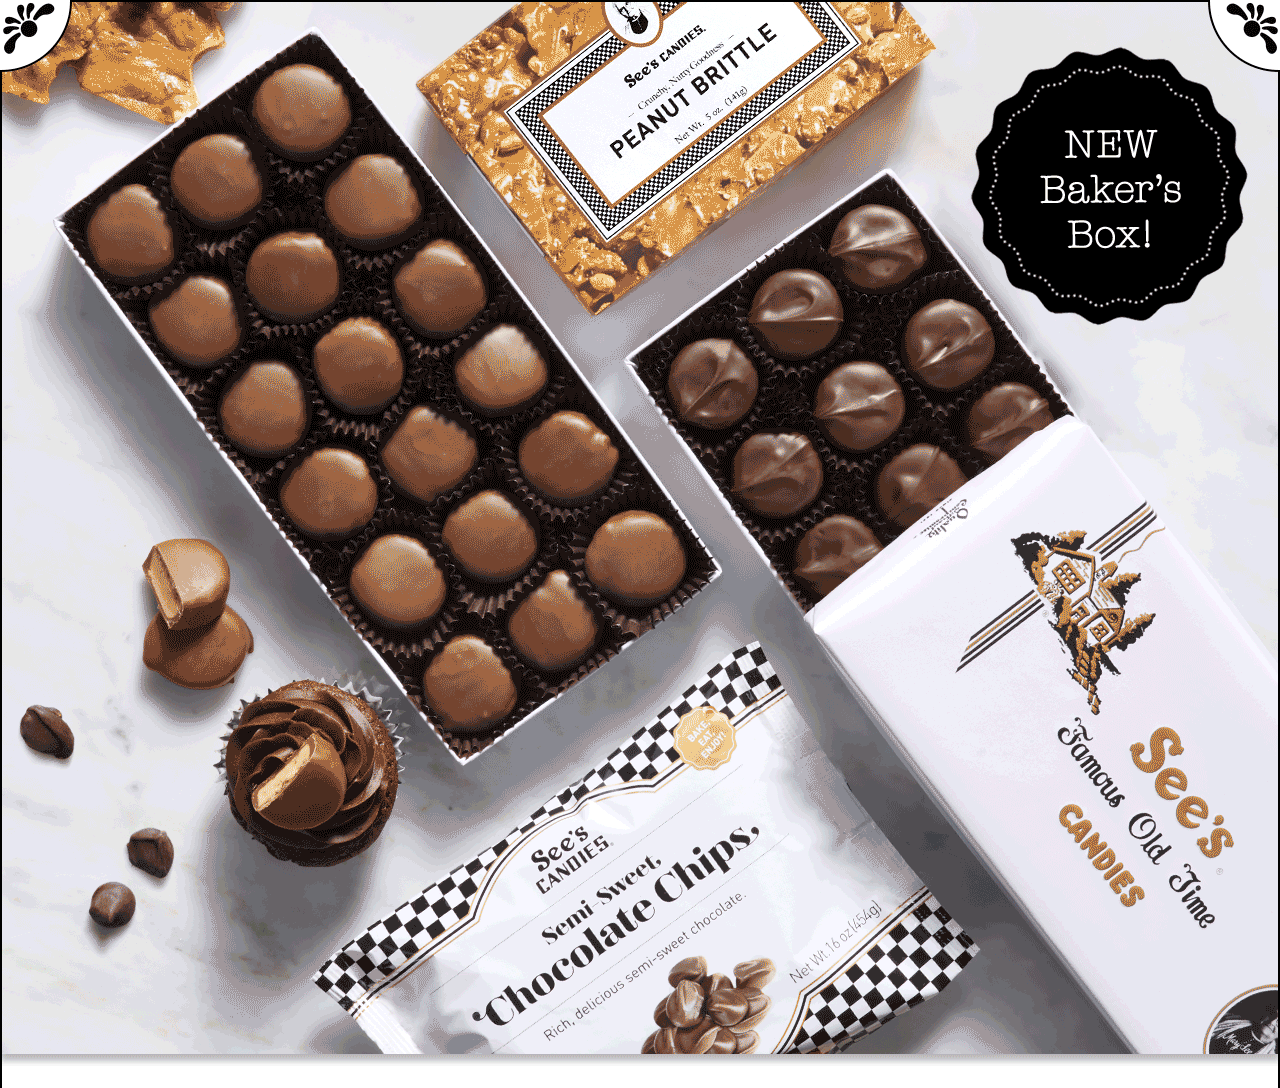 See's Candies, Inc.: NEW! Introducing a Special Box for Every